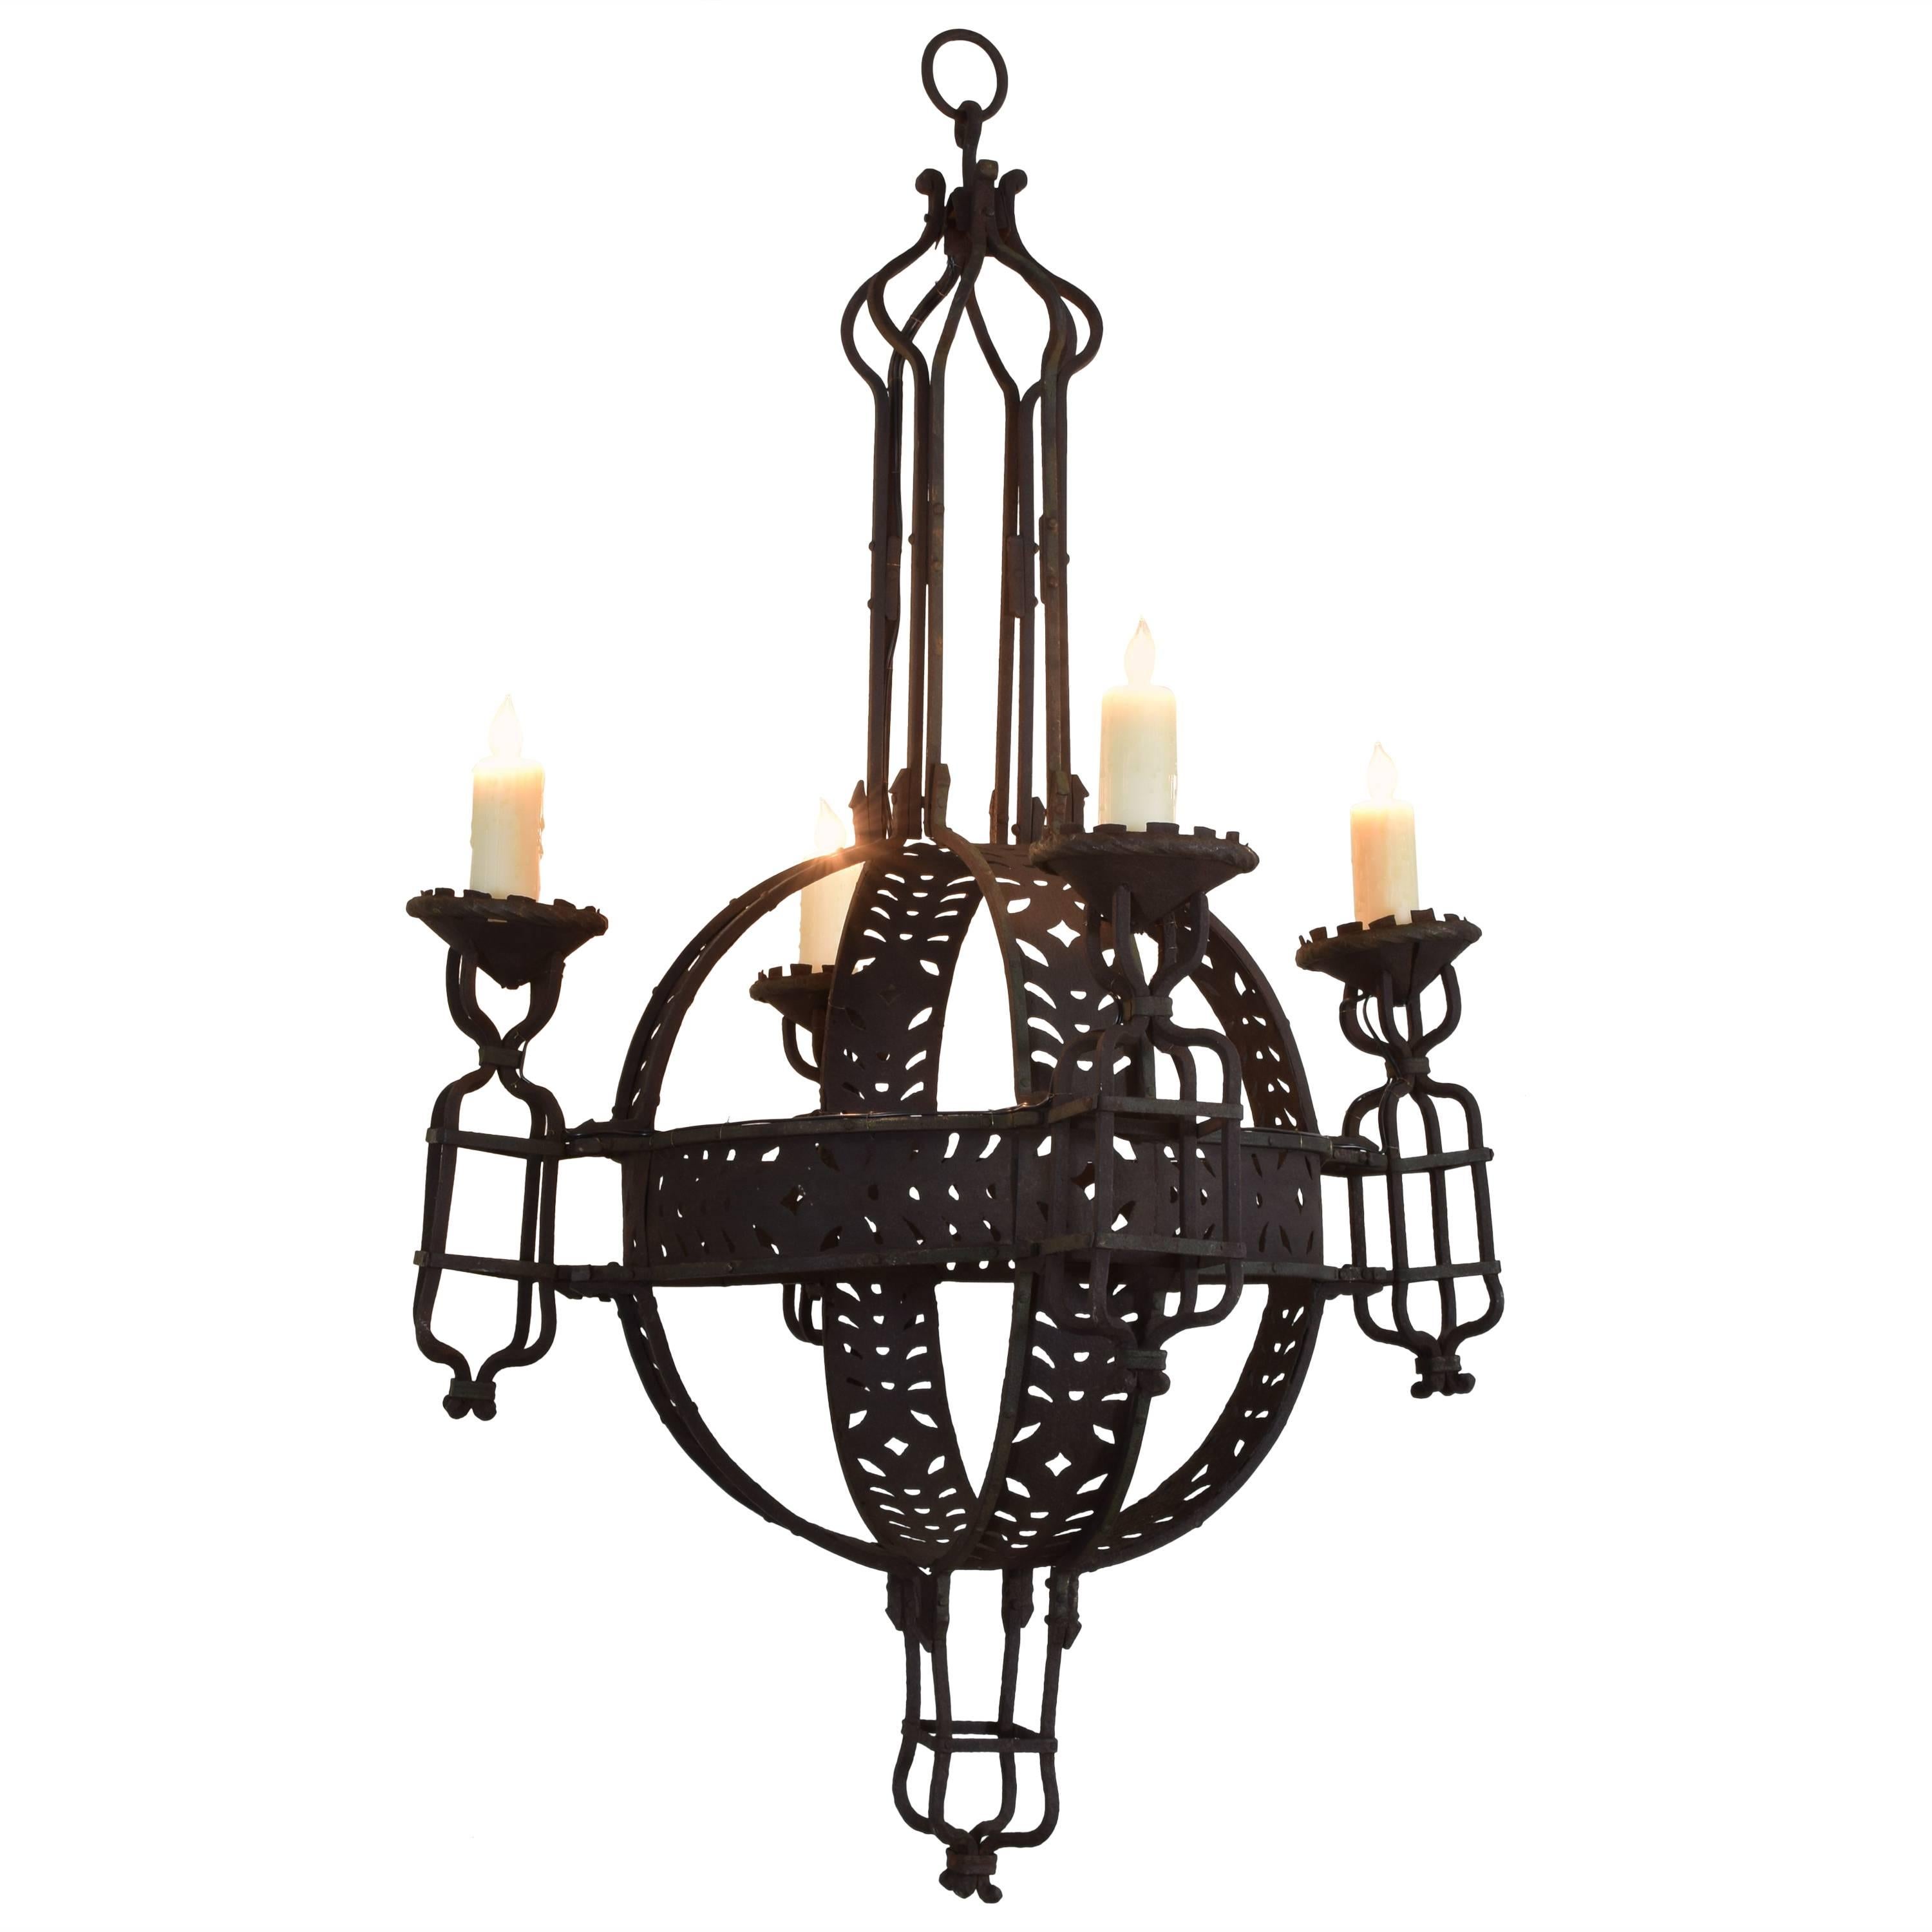 Large Italian Wrought Iron Four-Light Orb Chandelier, circa 1900 For Sale